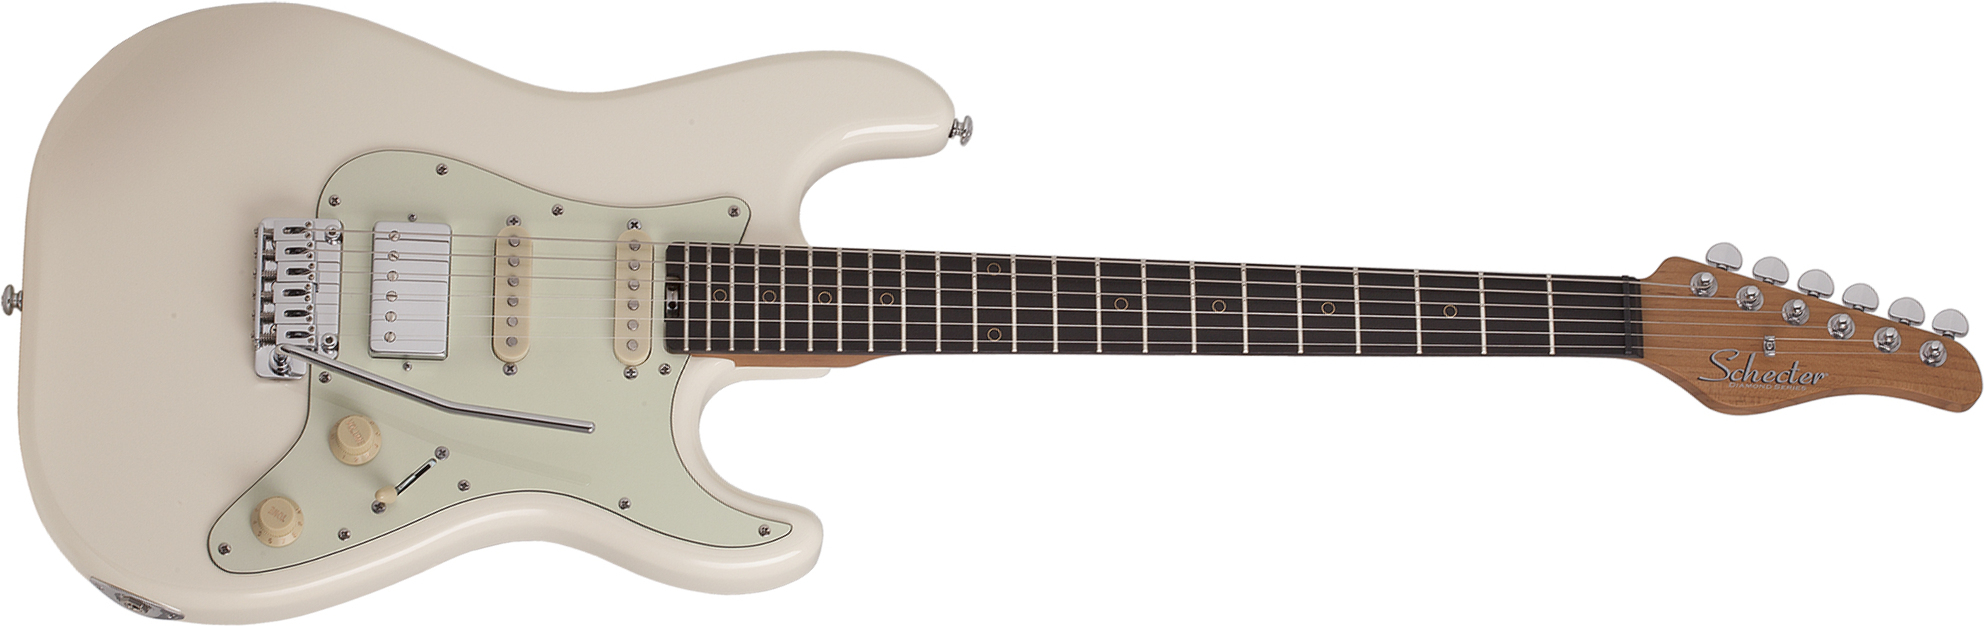 Schecter Nick Johnston Traditional Hss Trem Eb - Atomic Snow - E-Gitarre in Str-Form - Main picture